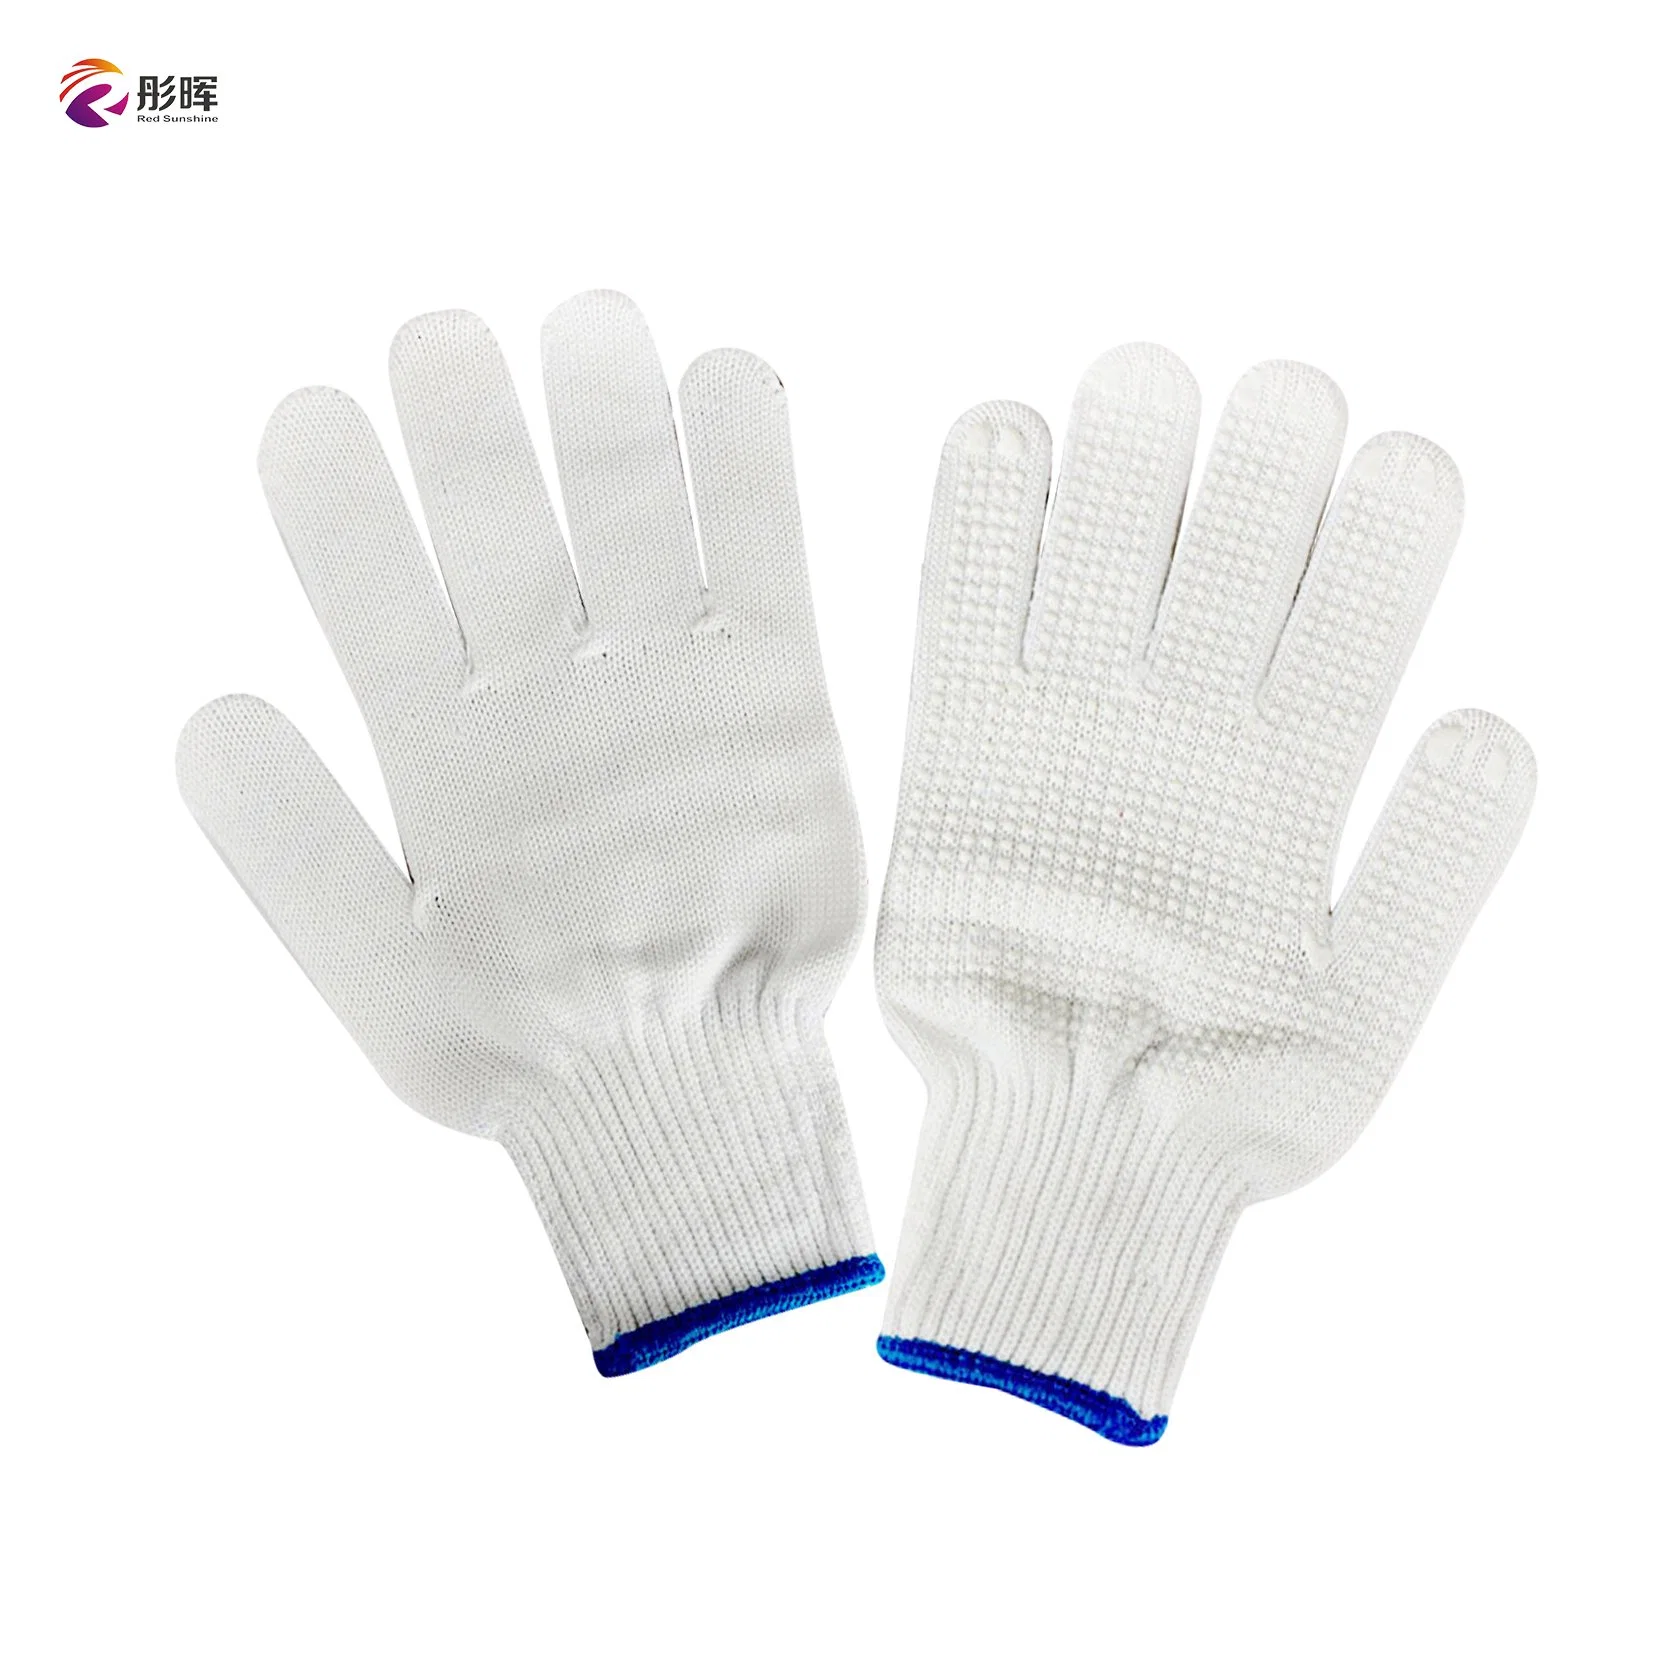 Wholesale White 7 Needle Point Plastic Glue Gloves Wear-Resistant Anti-Slip PVC Dotted Cotton Yarn Labor Protection Work Gloves